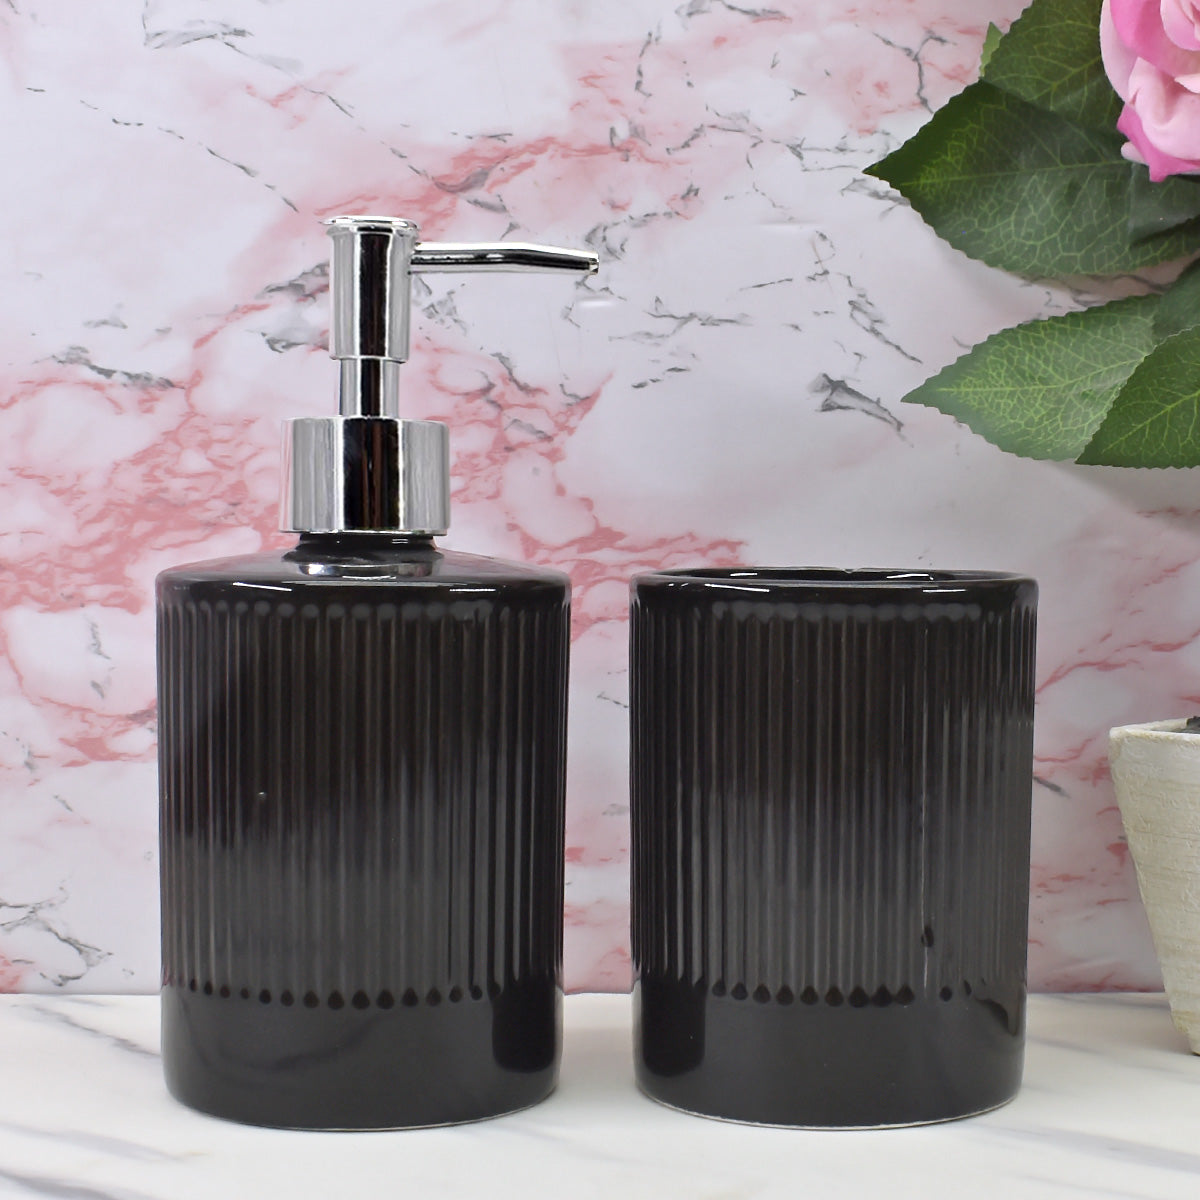 Kookee Ceramic Bathroom Accessories Set of 2, Modern Bath Set with Liquid handwash Soap Dispenser and Toothbrush holder, Luxury Gift Accessory for Home, Black (9718)